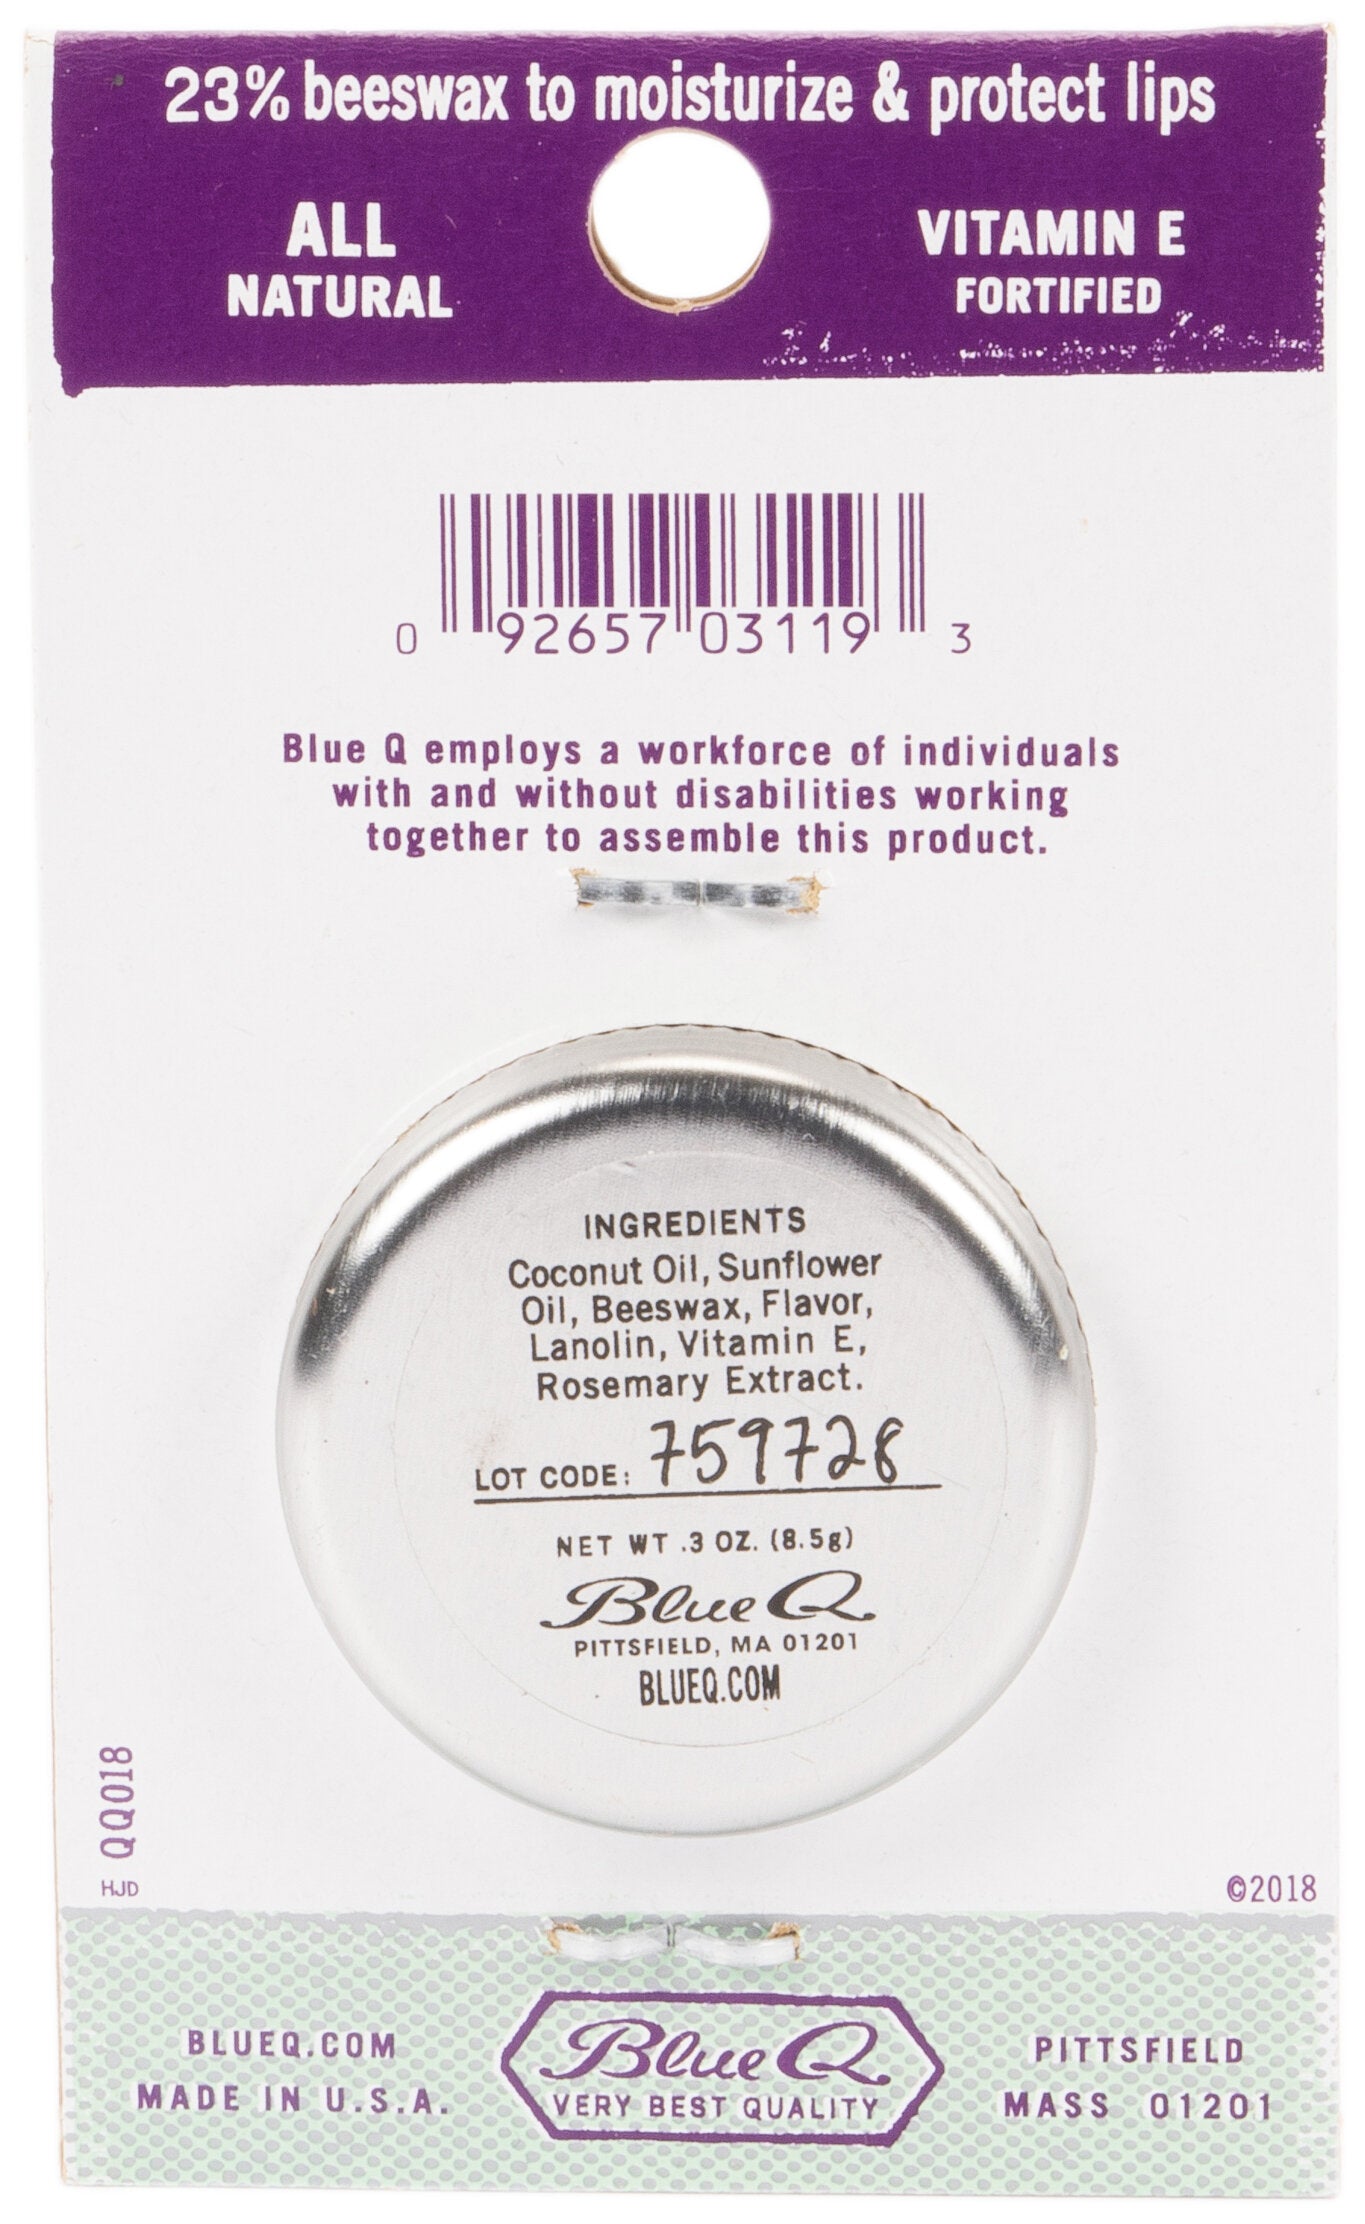 The back of the packaging for Blue Q lip shit Mocha almond, showing the ingredients of the product